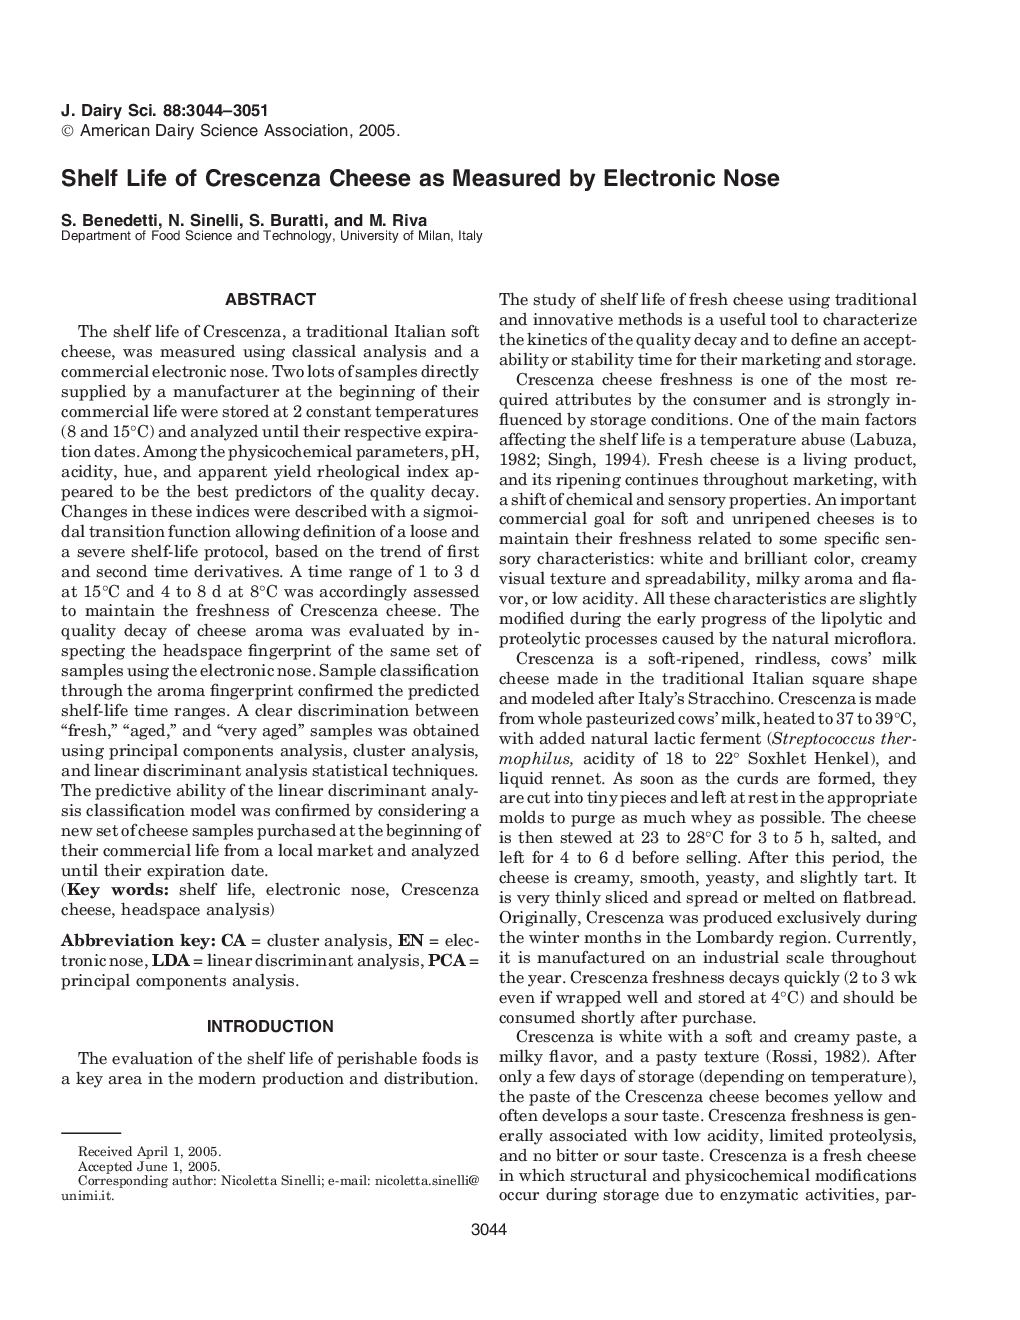 Shelf Life of Crescenza Cheese as Measured by Electronic Nose